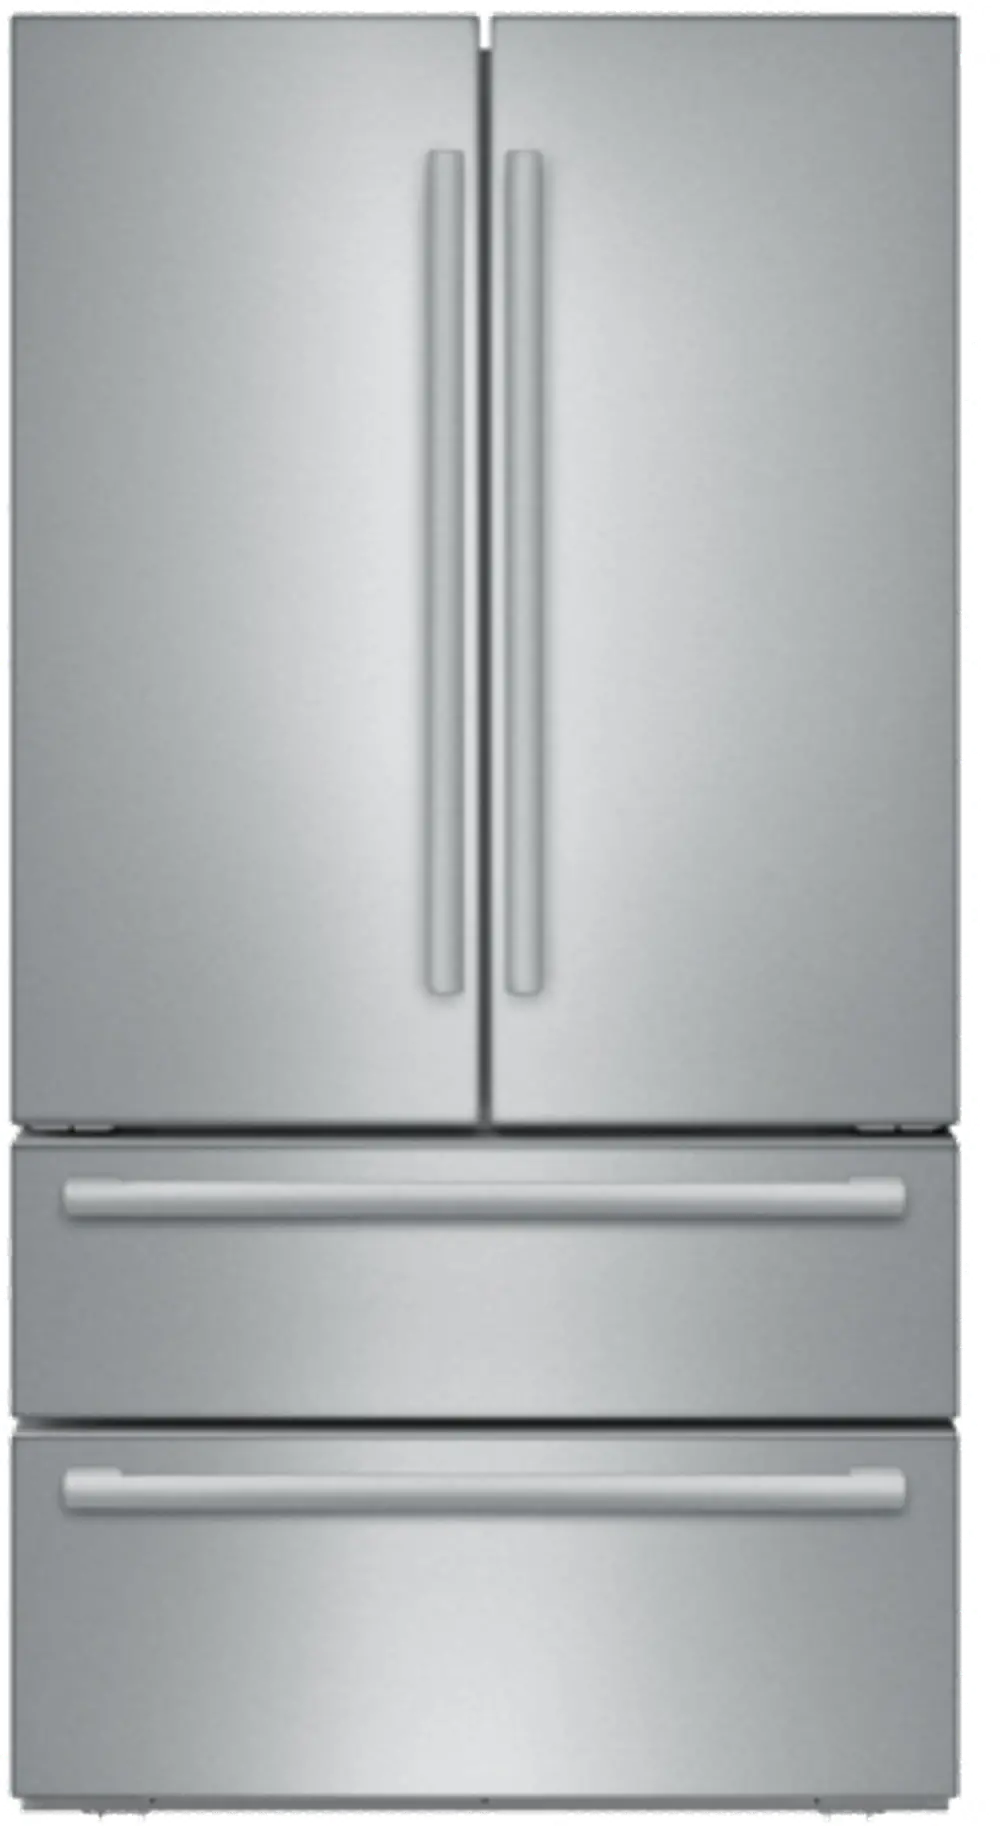 B21CL81SNS Bosch Counter Depth French Door Refrigerator - 20.7 cu. ft., 36 Inch Stainless Steel-1